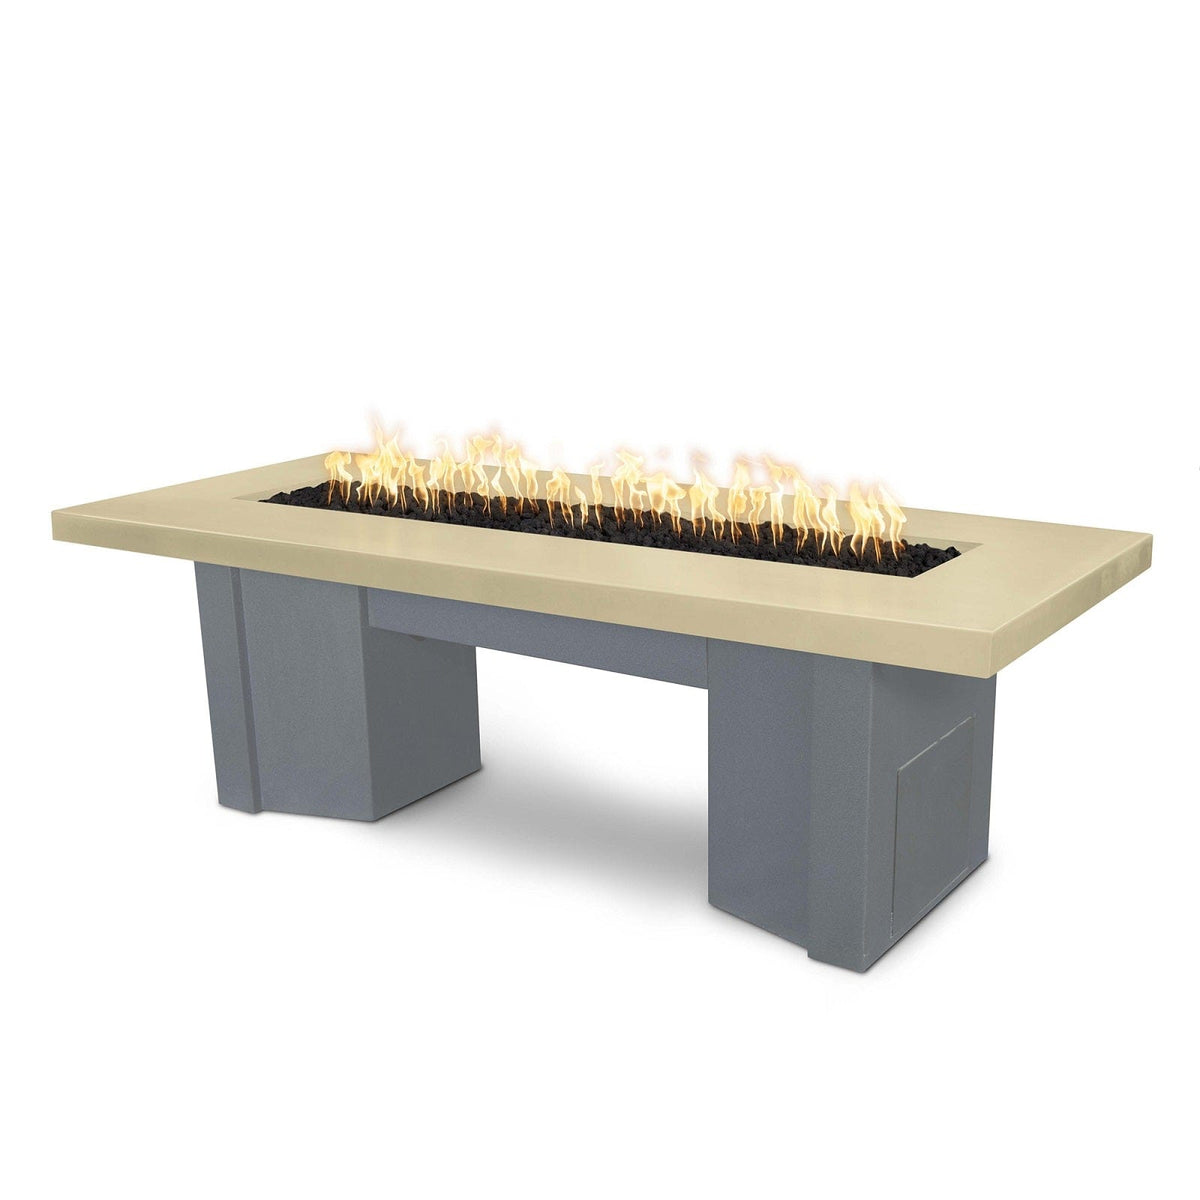 The Outdoor Plus Fire Features Vanilla (-VAN) / Gray Powder Coated Steel (-GRY) The Outdoor Plus 78&quot; Alameda Fire Table Smooth Concrete in Liquid Propane - Match Lit with Flame Sense System / OPT-ALMGFRC78FSML-LP